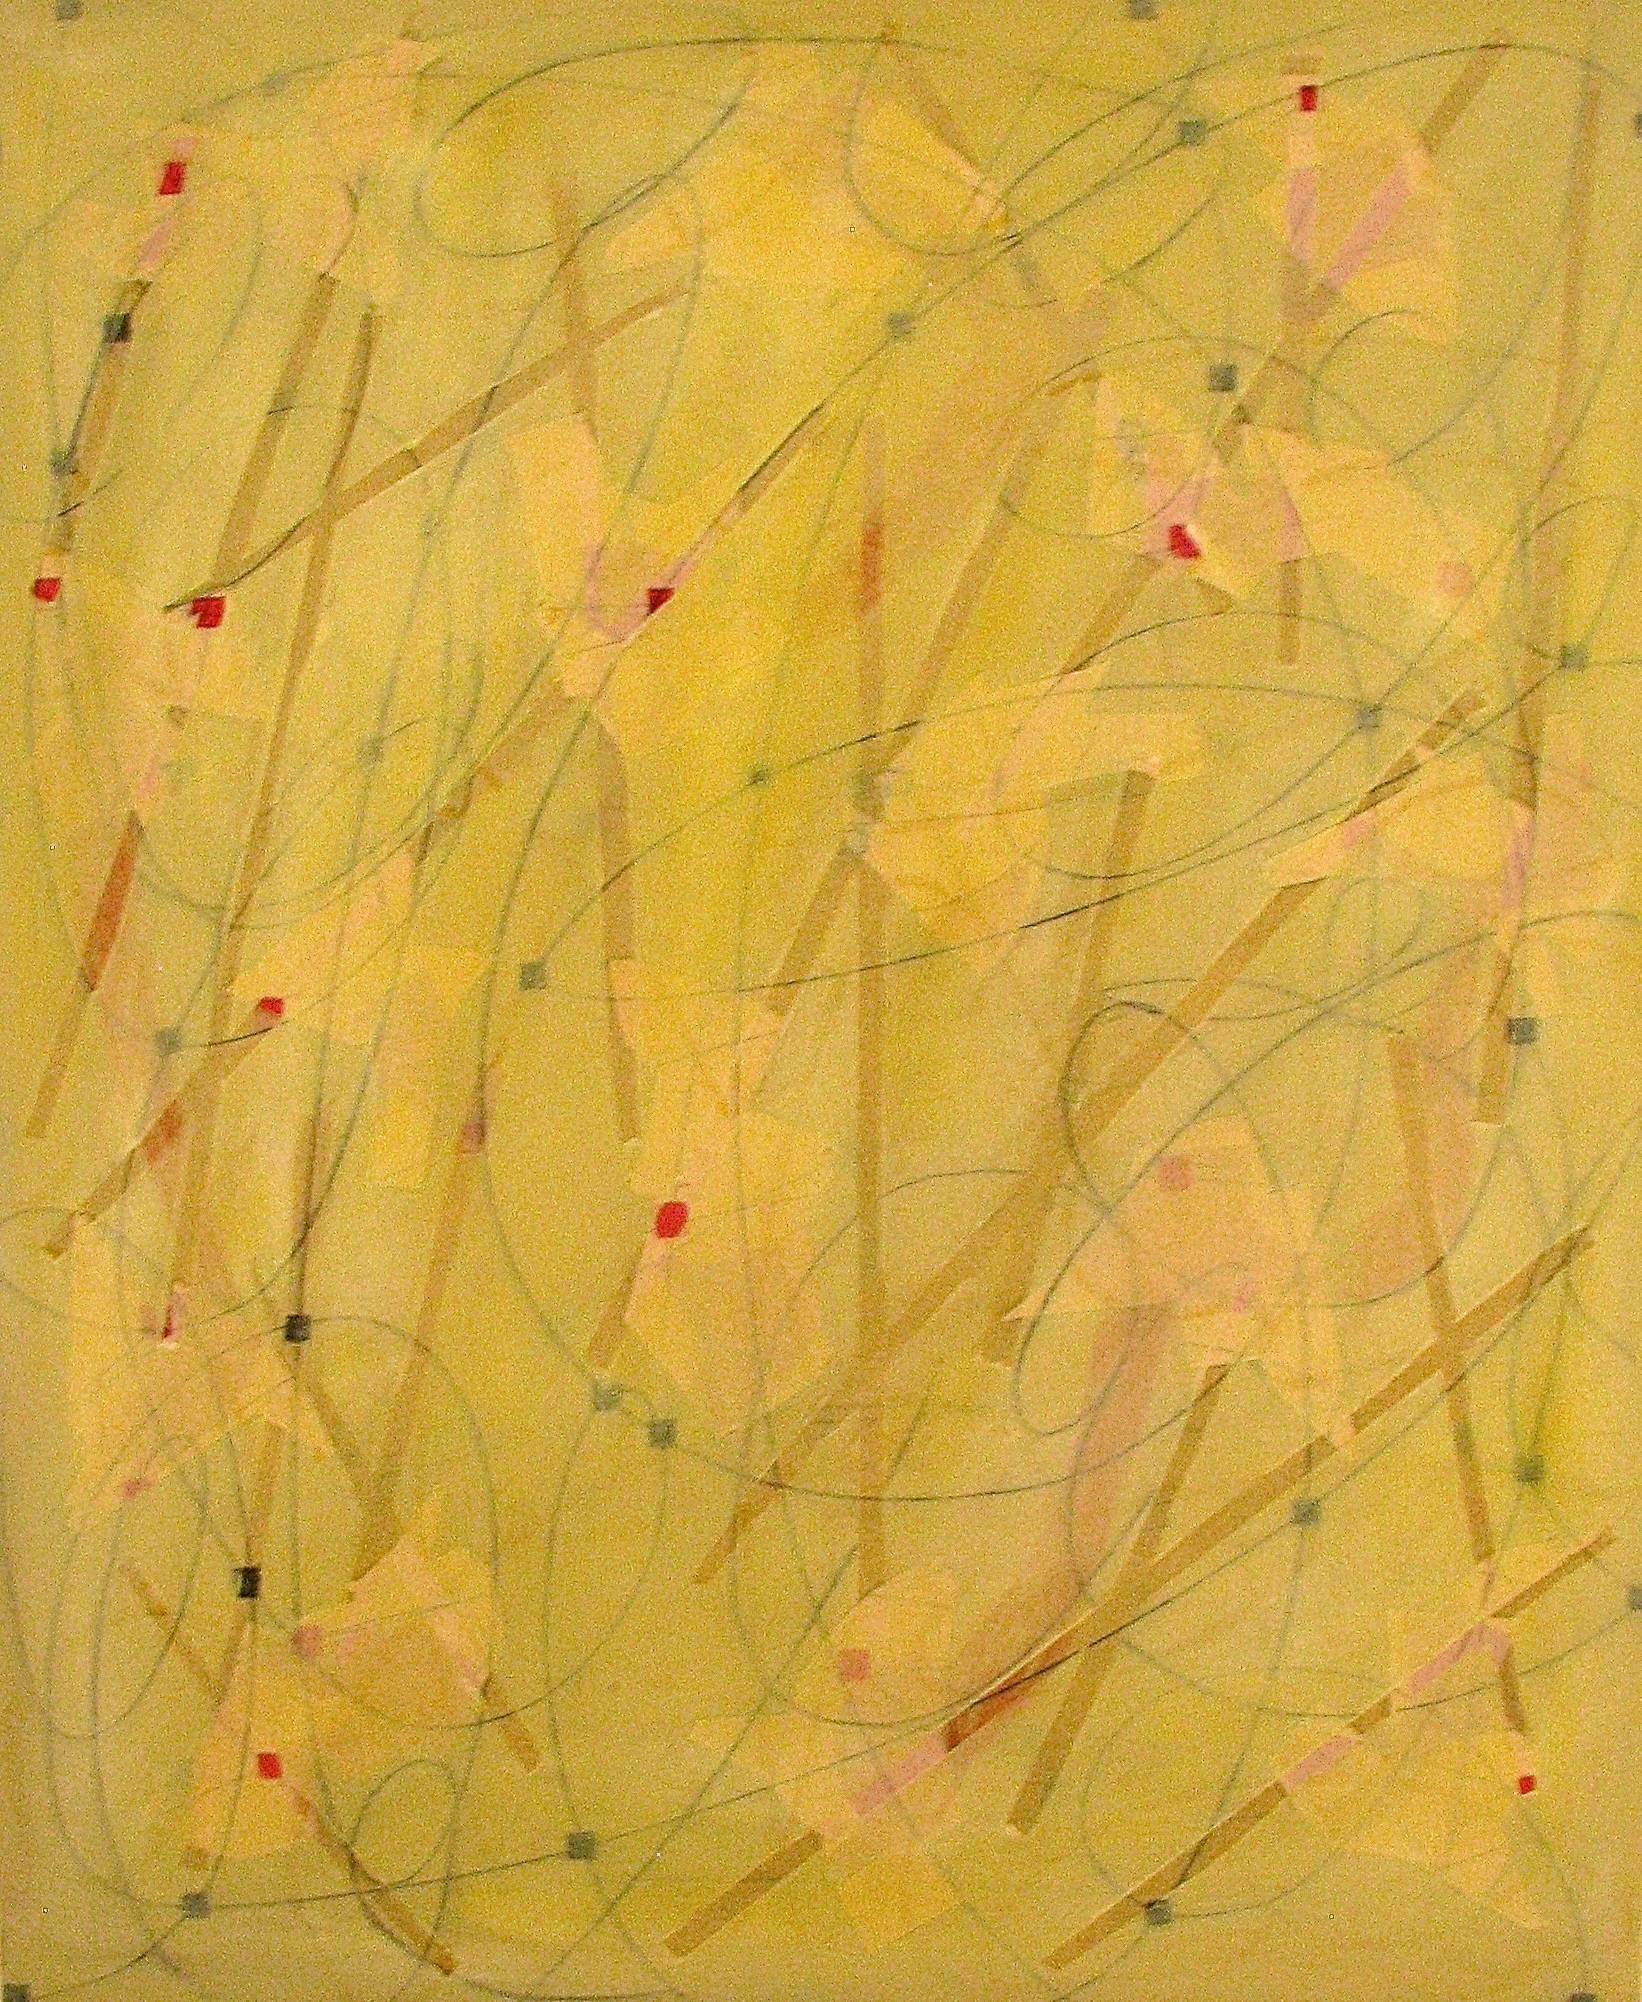 Nancy Berlin Abstract Drawing - "Blown Away 23" Abstract Expressionist Yellow Bright Colorful Mixed Media